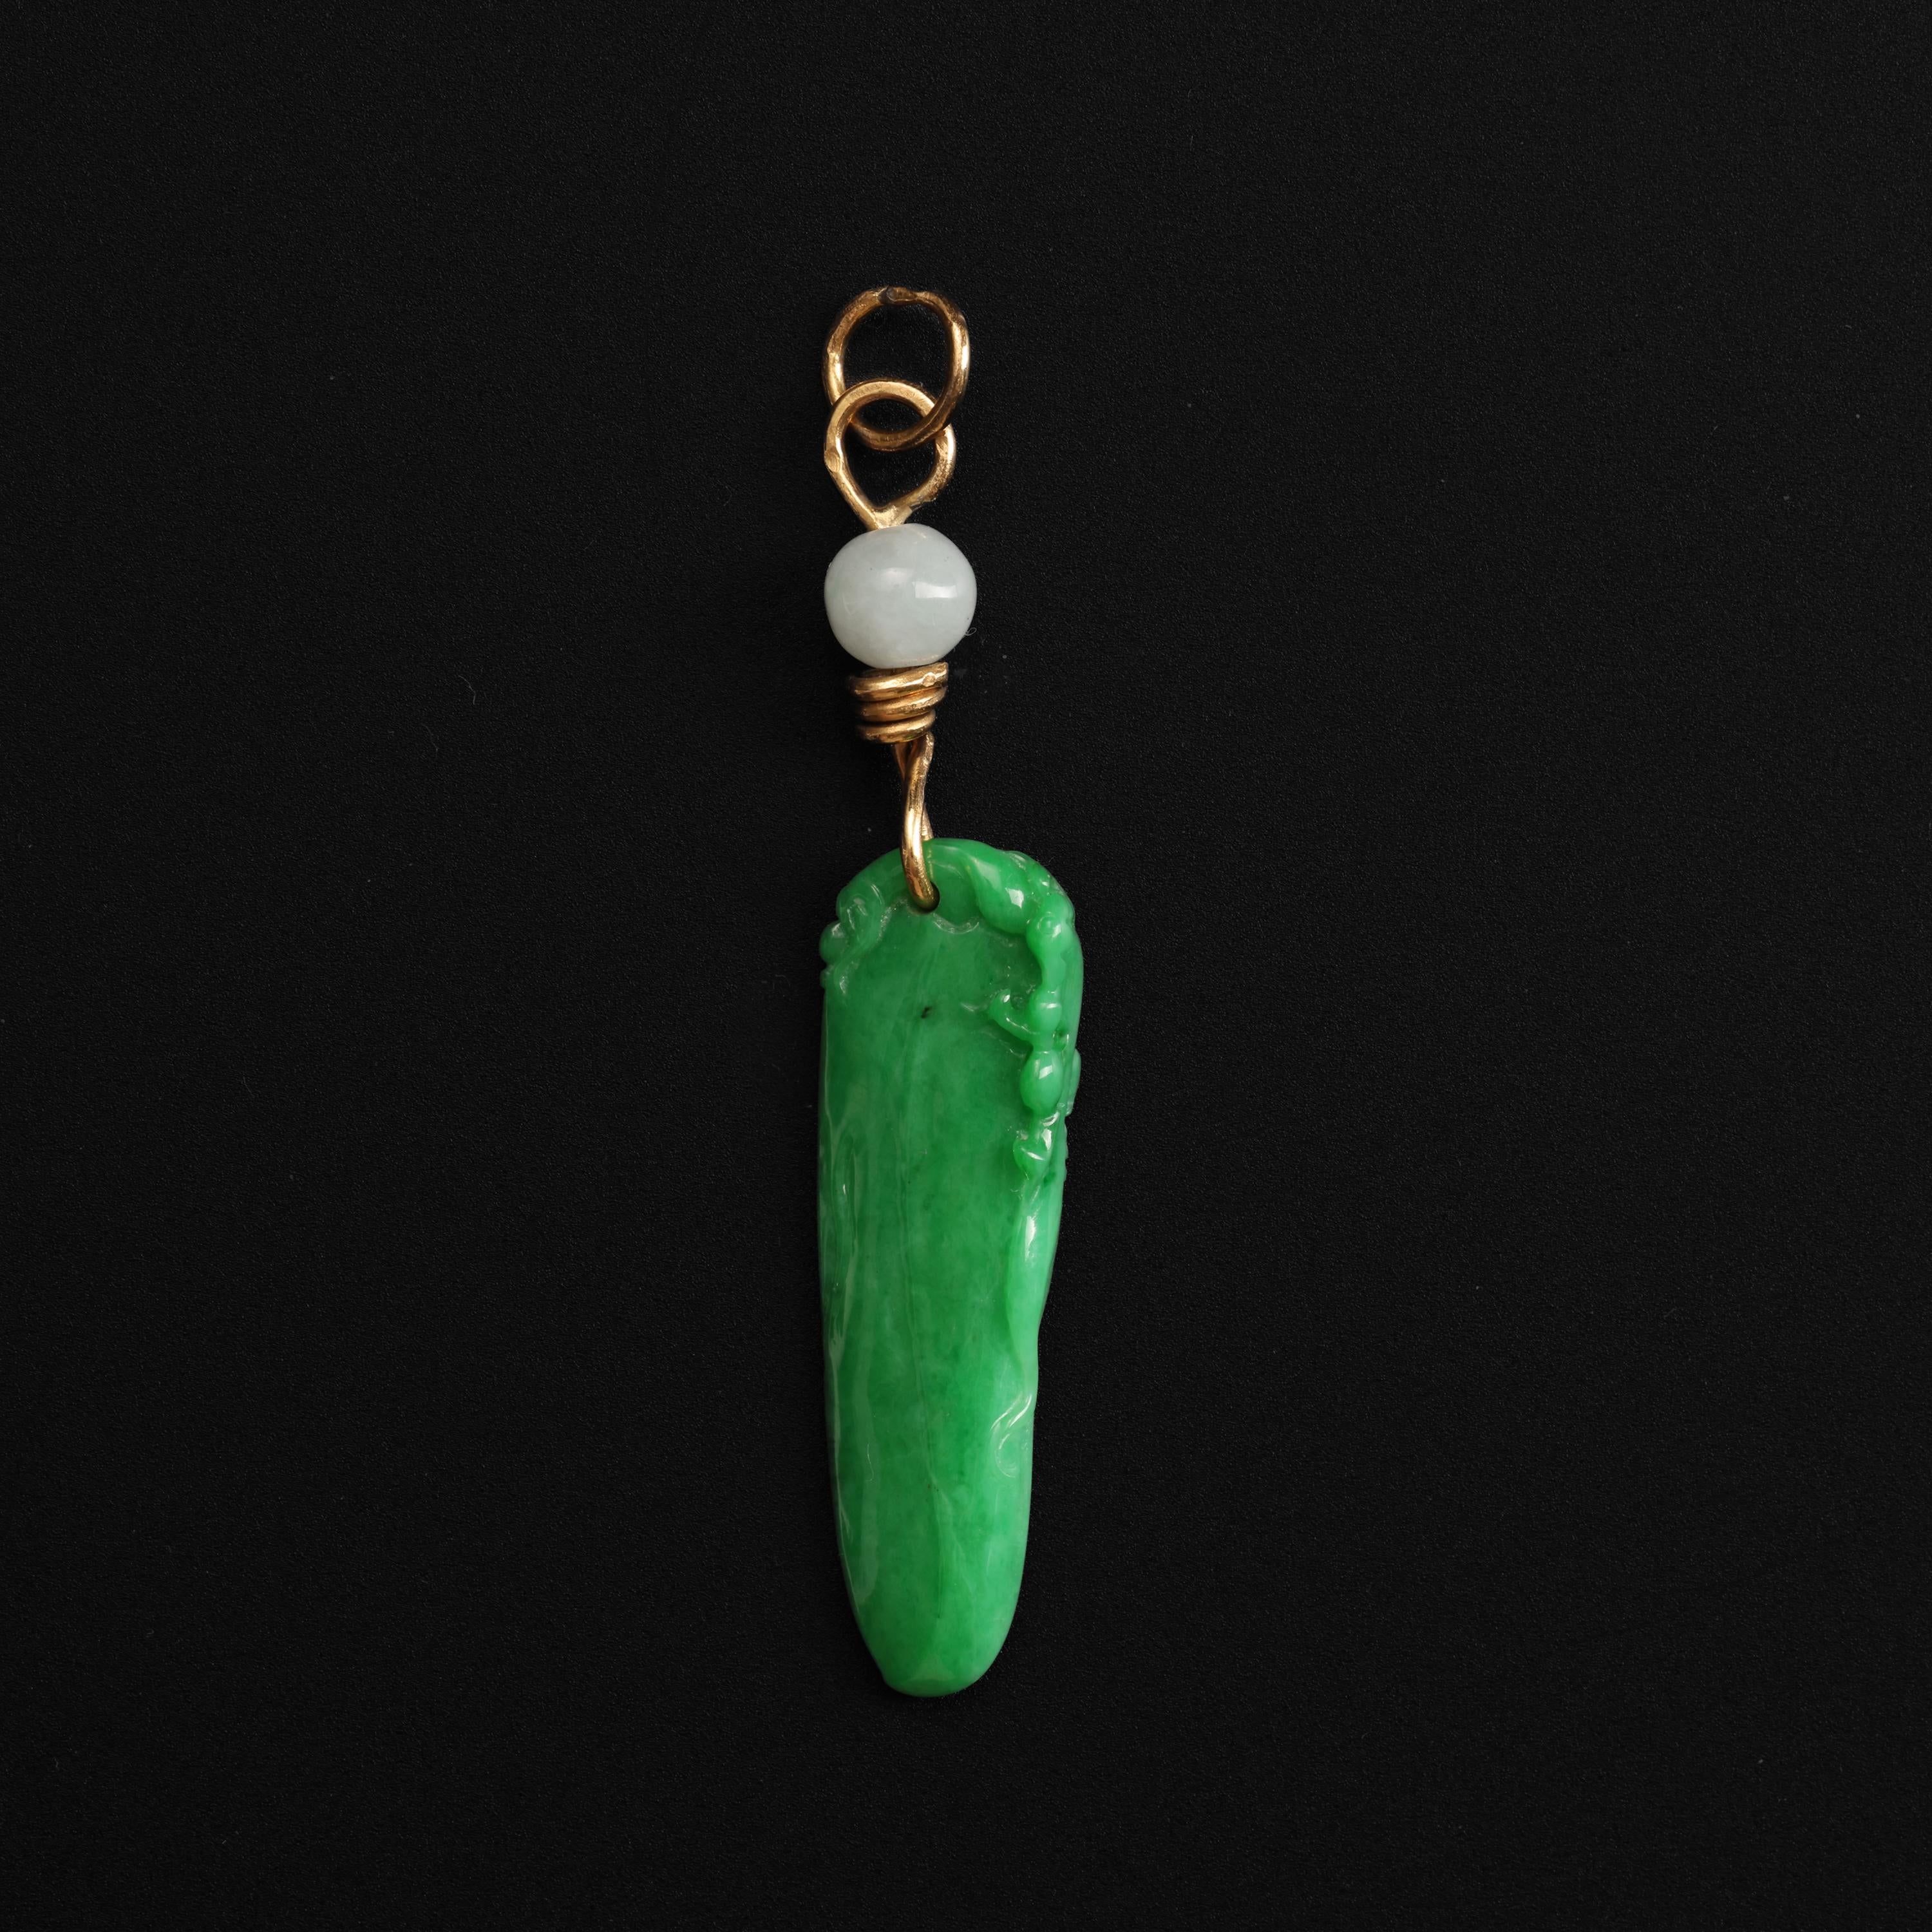 This jade pendant was hand-carved by a master lapidary artist with unusual natural and untreated jadeite jade from Burma. I say unusual because the color is vividly intense. As a gemologist myself and a second-generation collector of jade, I pride